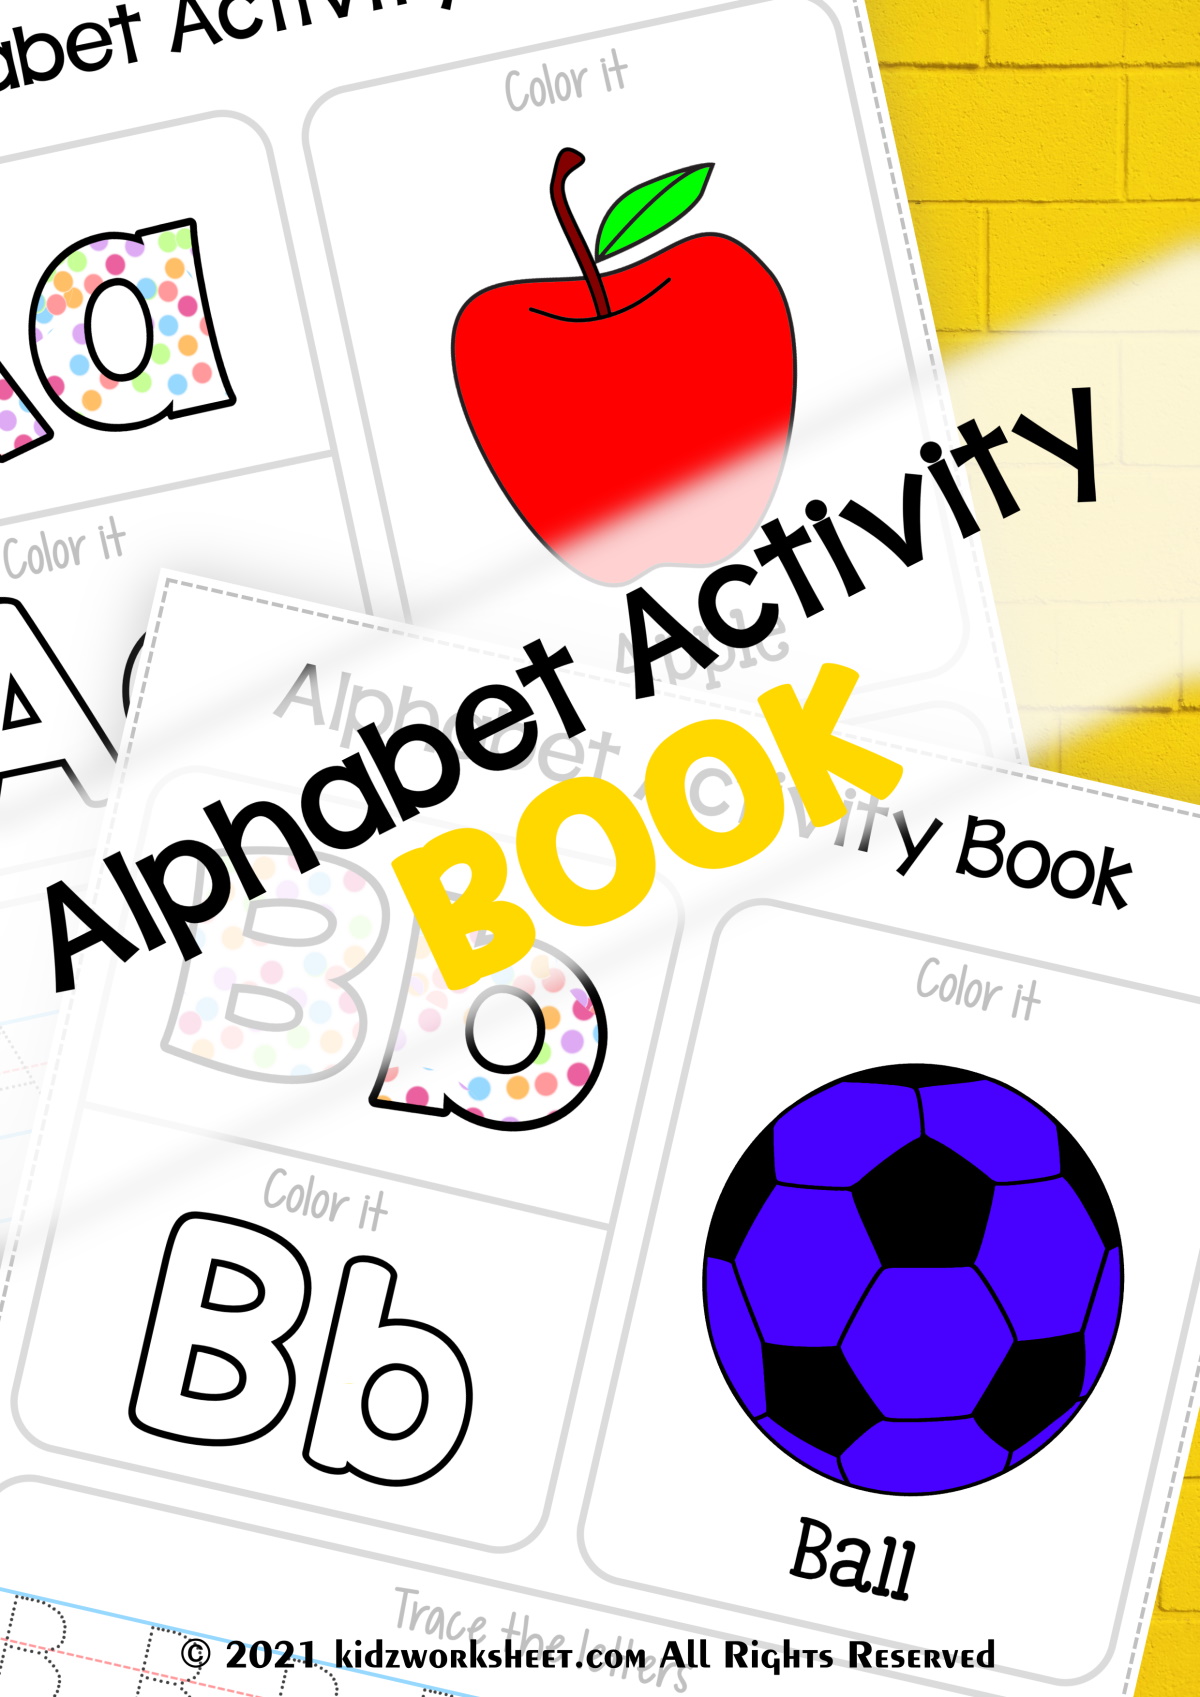 Preschool Color Books - From ABCs to ACTs